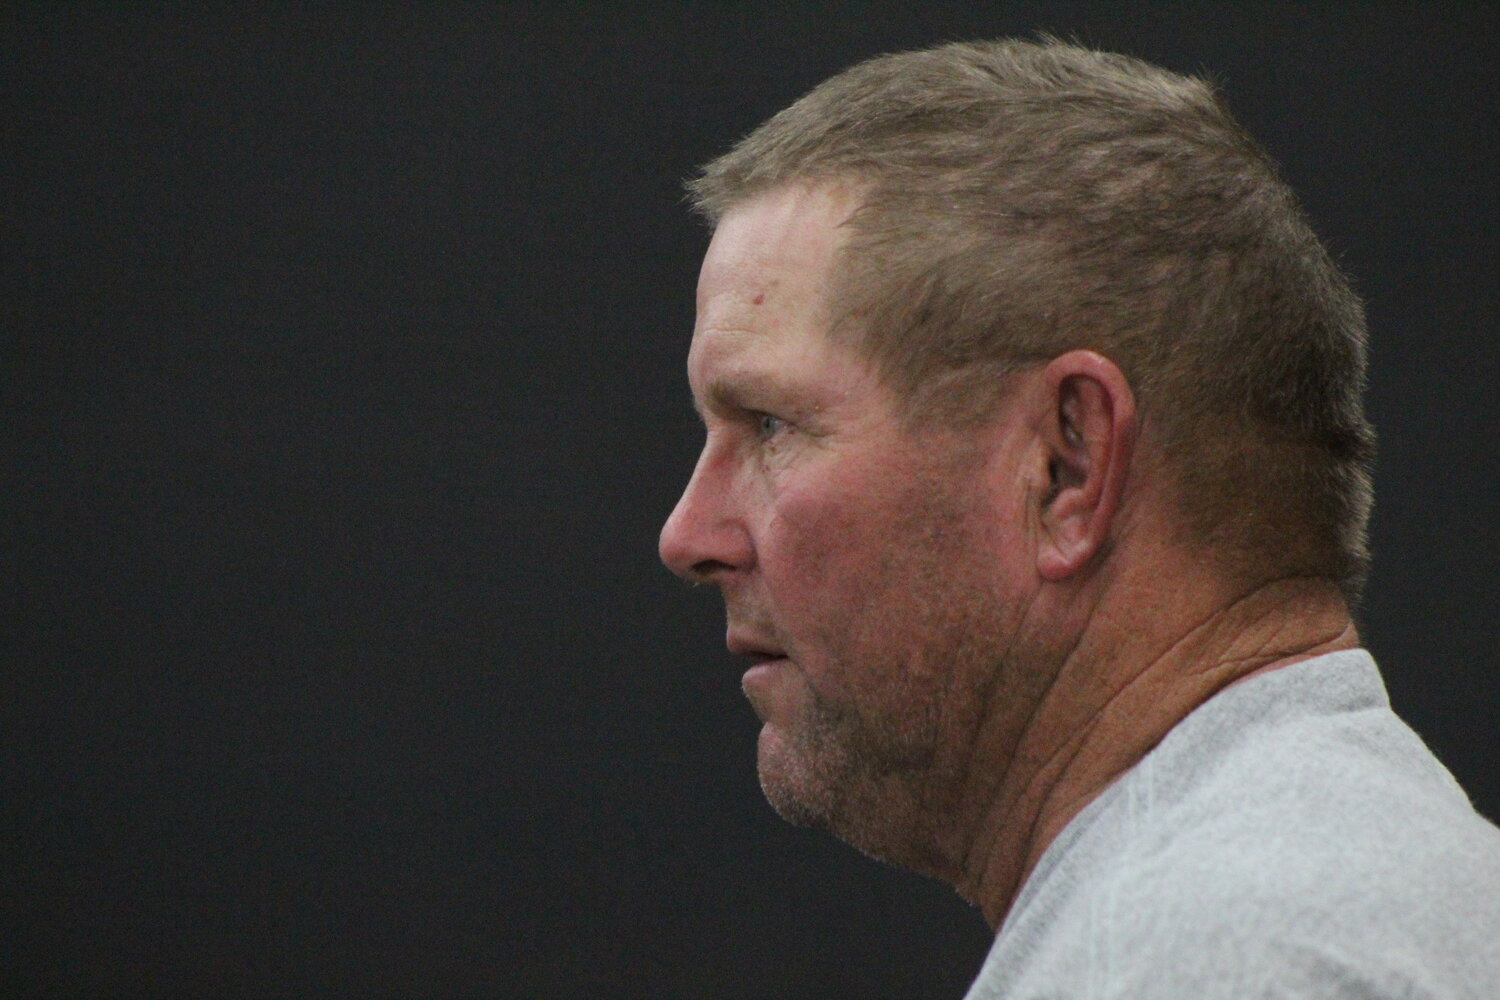 Randy Billups has been the wrestling coach at Mid-Prairie for nearly 30 years.